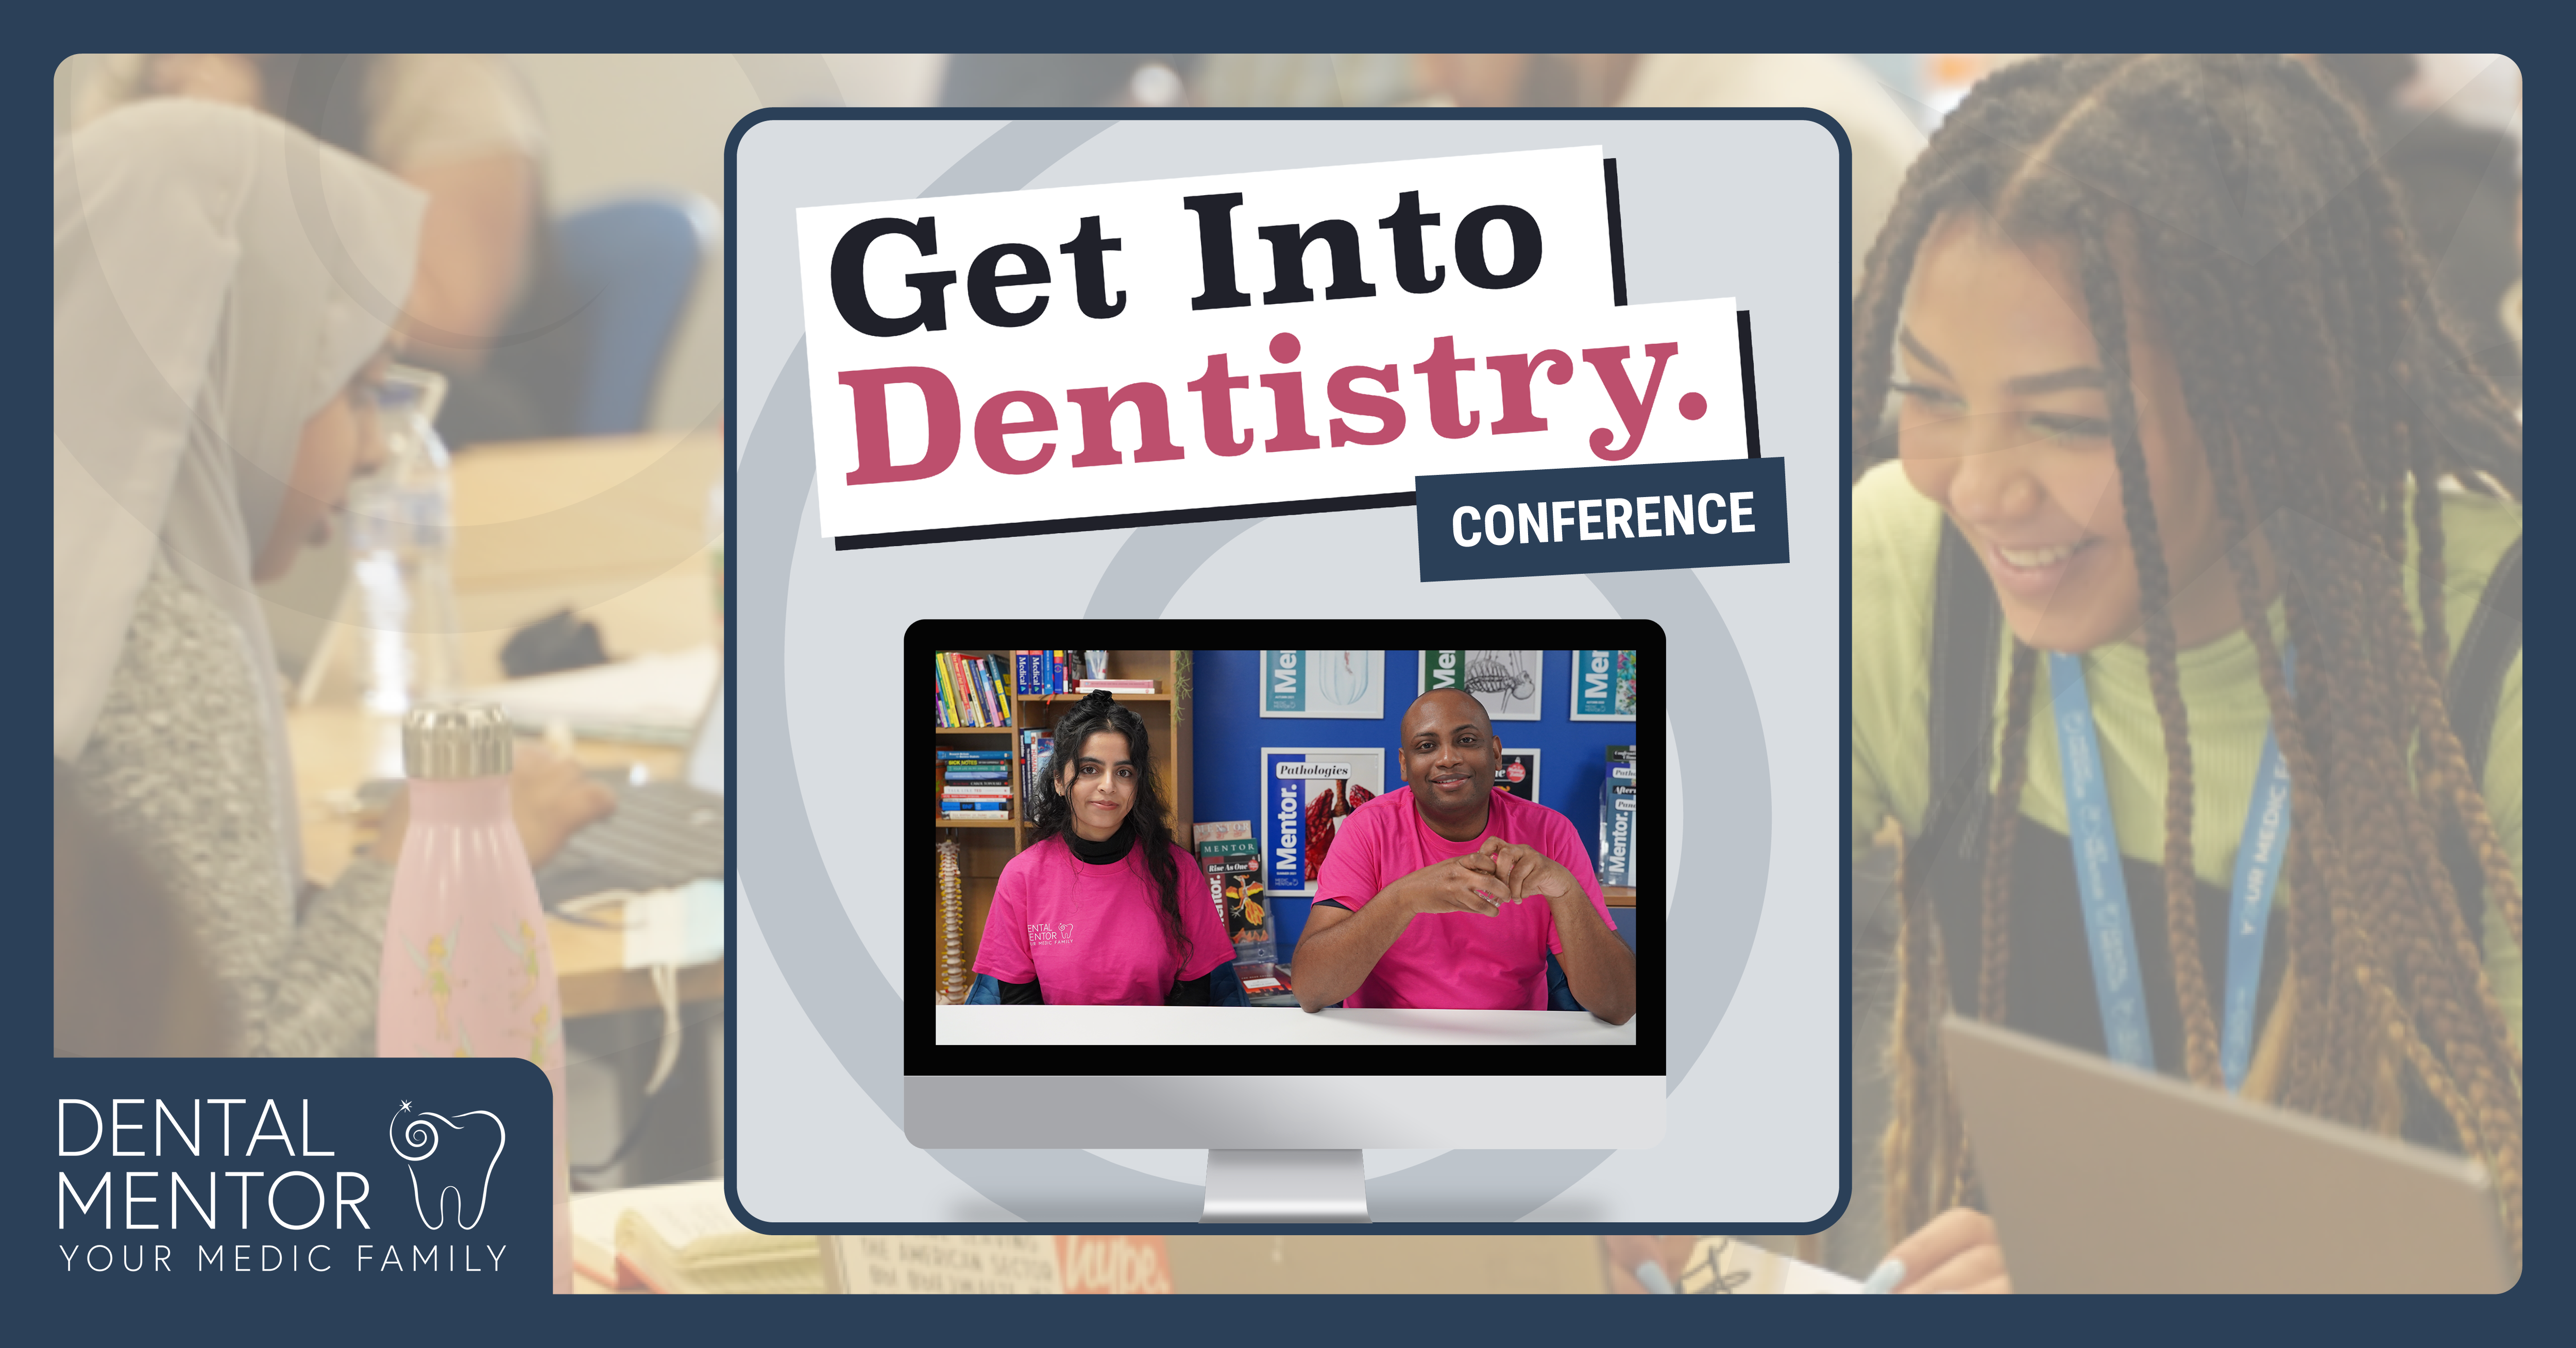 The Get Into Dentistry E-Learning Conference